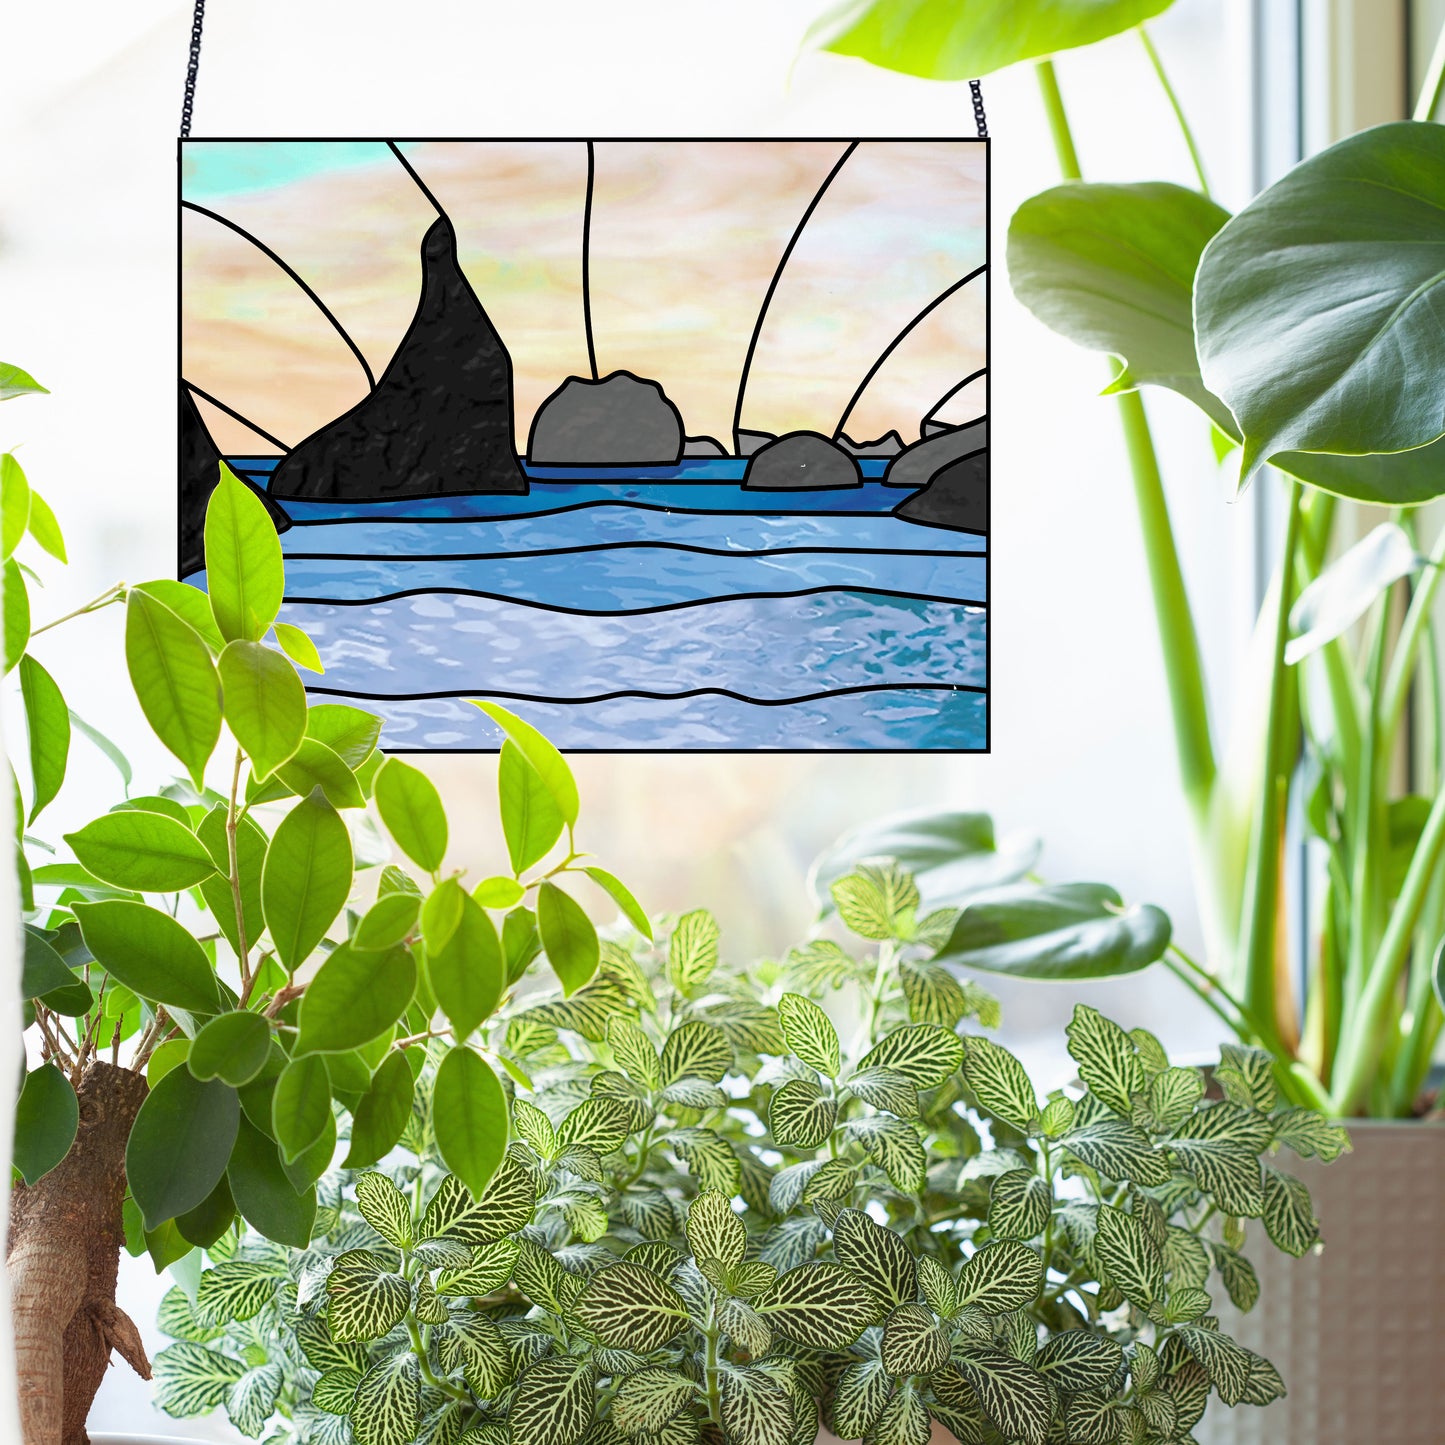 bandon, oregon coast stained glass pattern, instant pdf, panel shown in window with plants